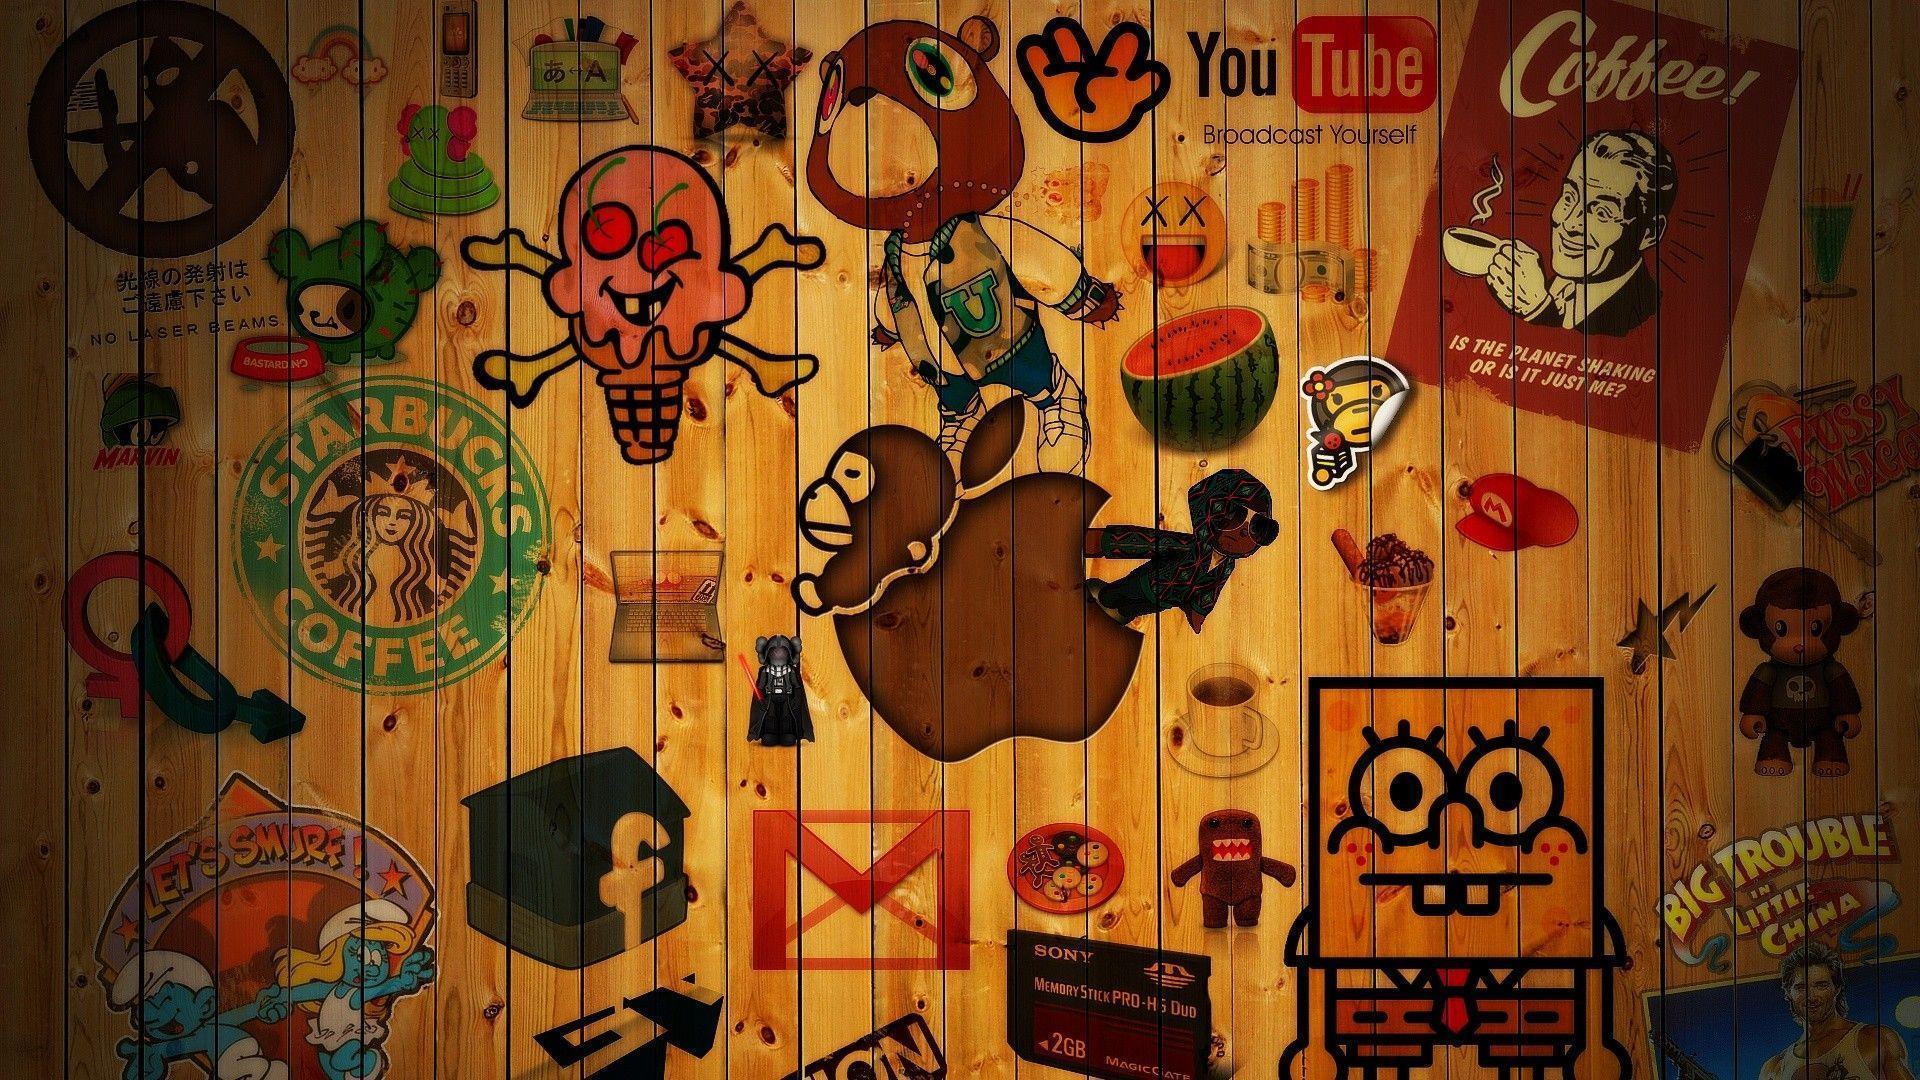 Youtube Backgrounds Free Download